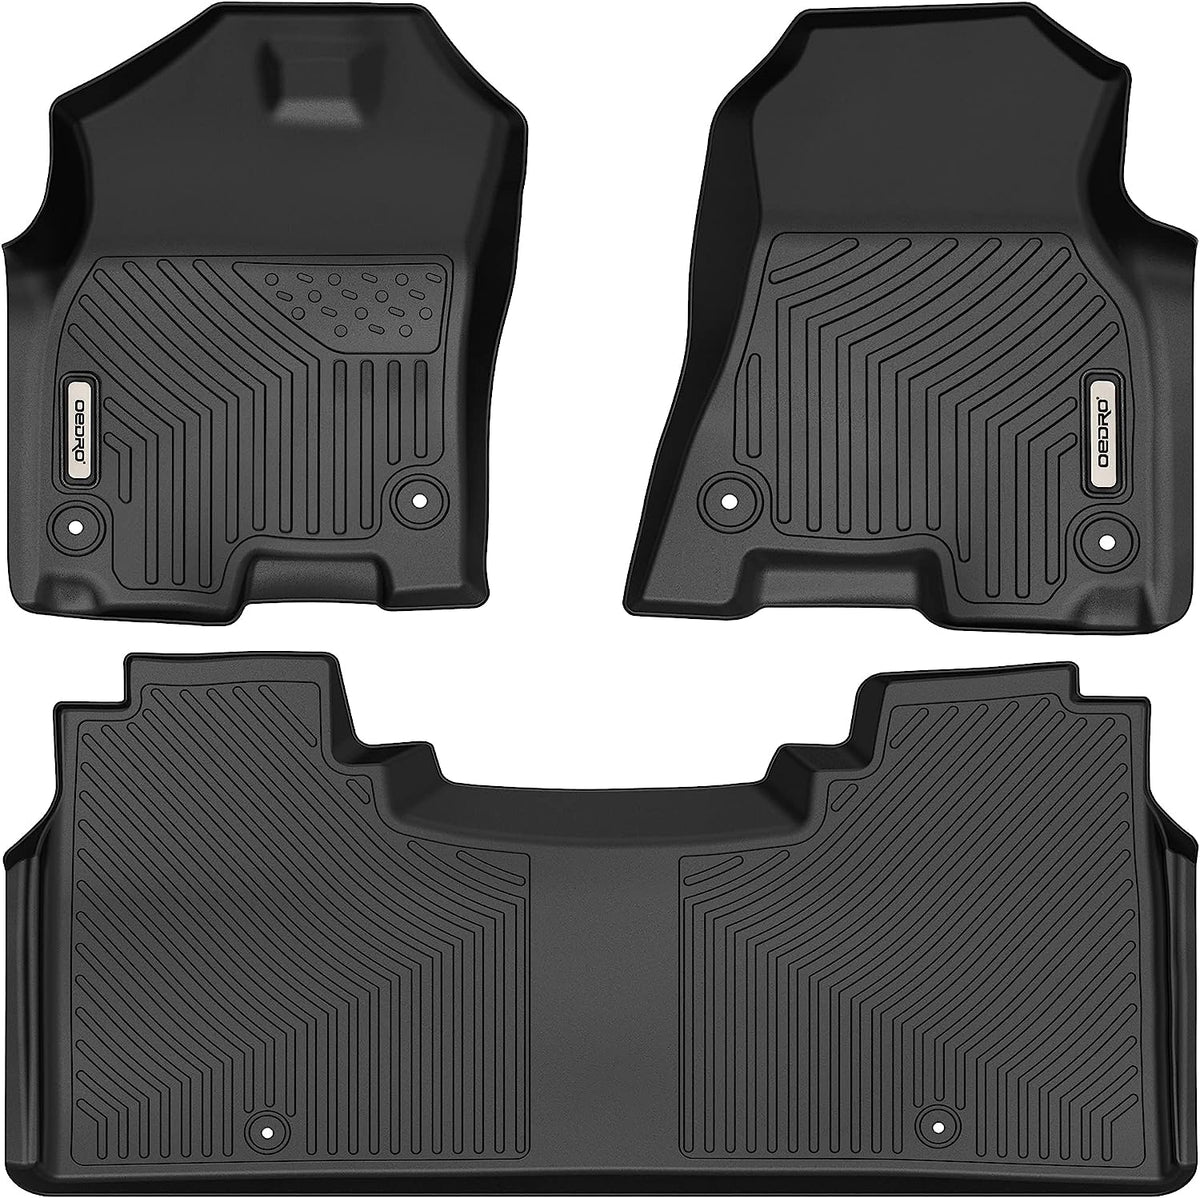 OEDRO Floor Mats Compatible with 2019-2023 Dodge Ram 1500 New Body Crew Cab (NOT for Classic Models), Front Row Bucket Seats, with Under Seat Storage Box, Black TPE All-Weather Guard - Custom Fit